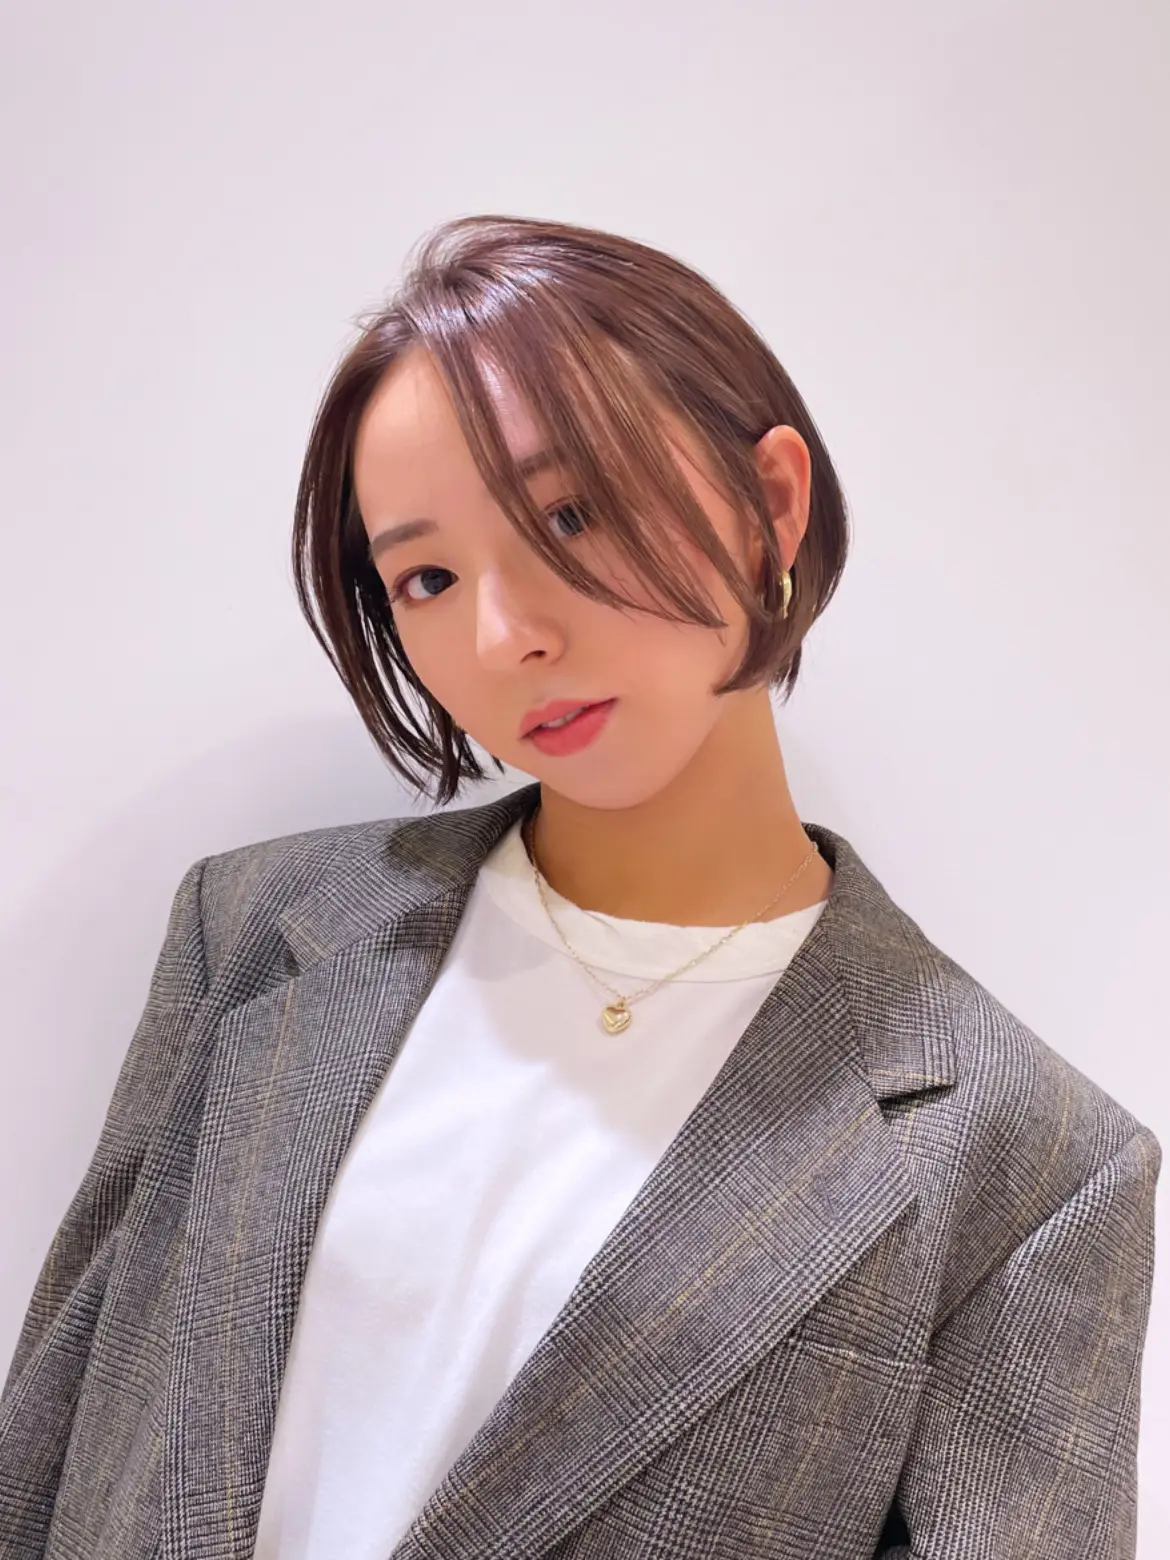 Short ✖ ︎ Highlight 】 Three-dimensional hairstyle | Gallery